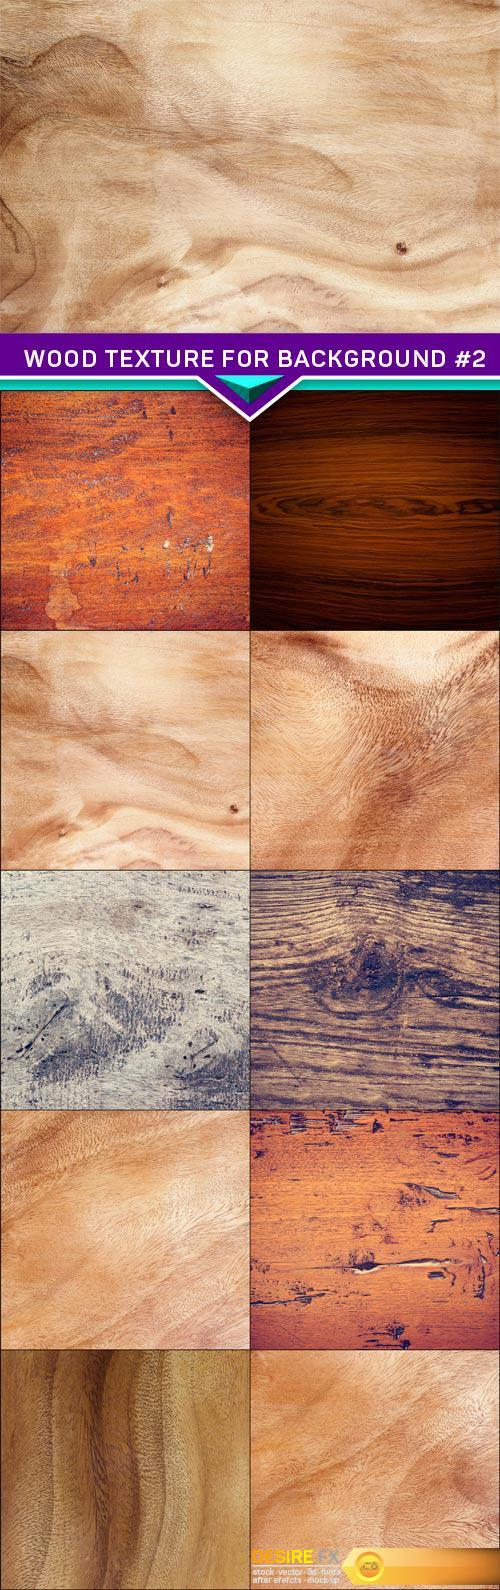 Wood texture for background #2 10X JPEG